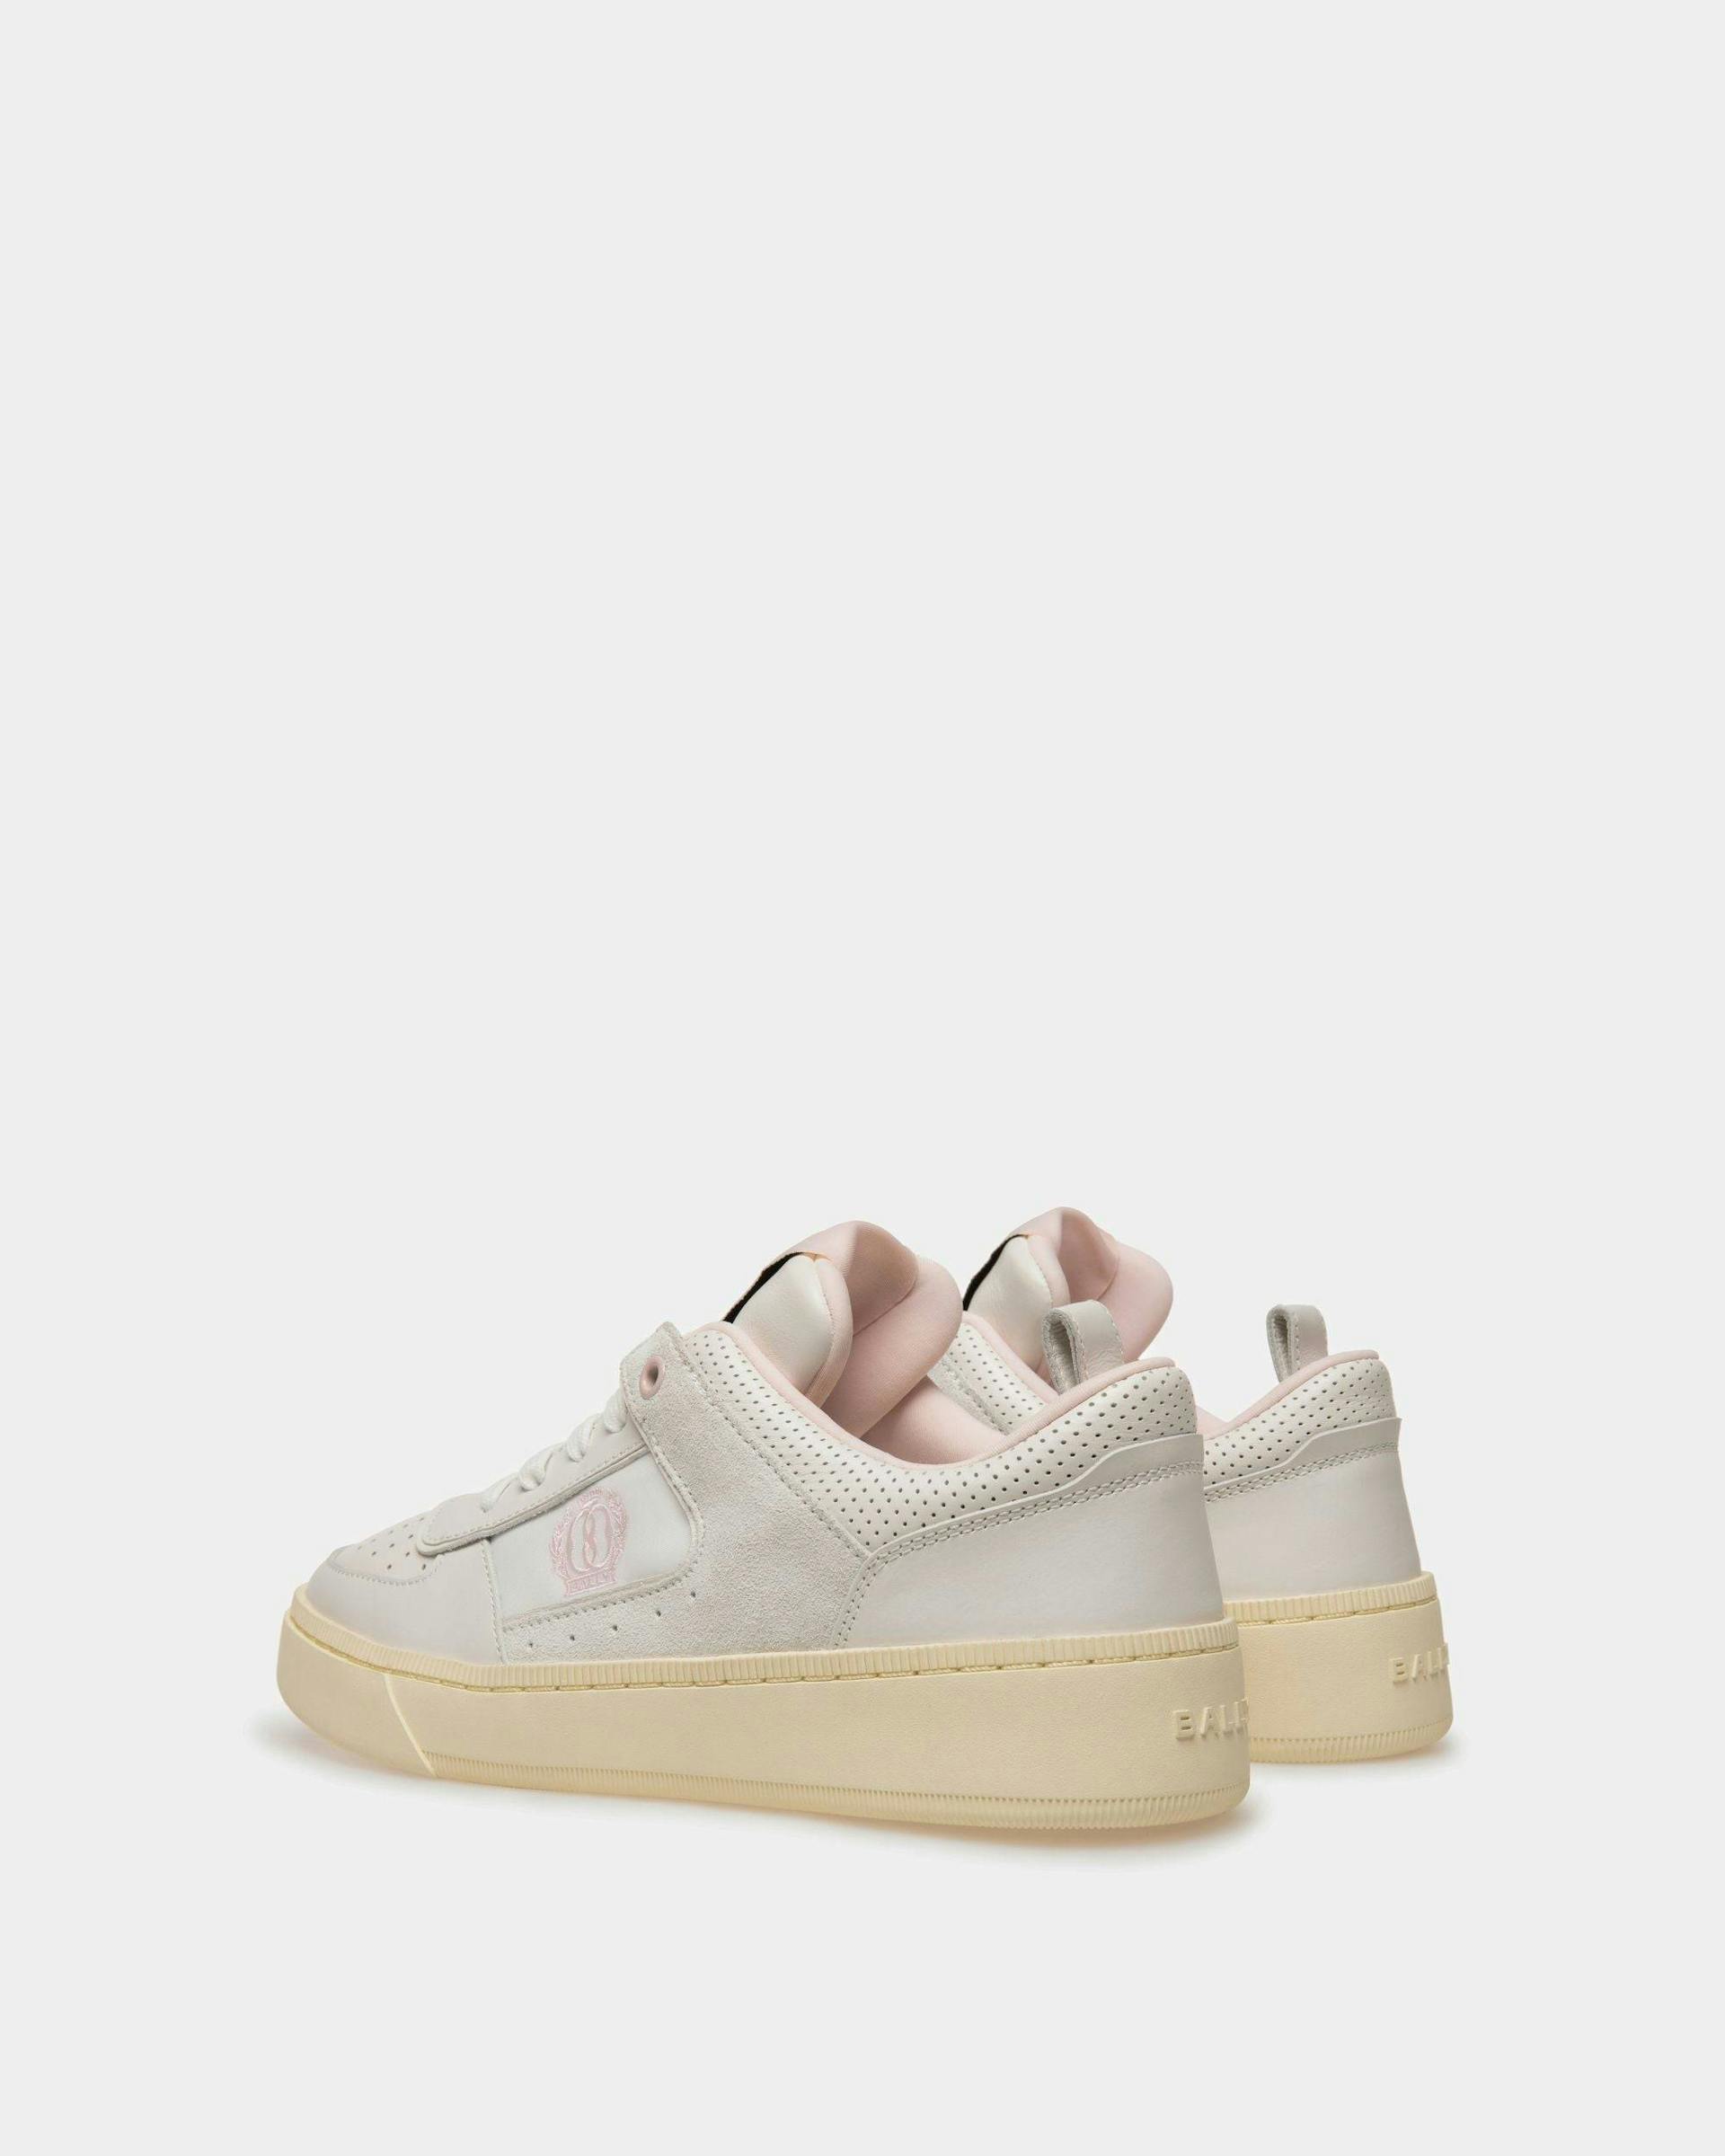 Women's Raise Sneakers In White And Pink Leather | Bally | Still Life 3/4 Back